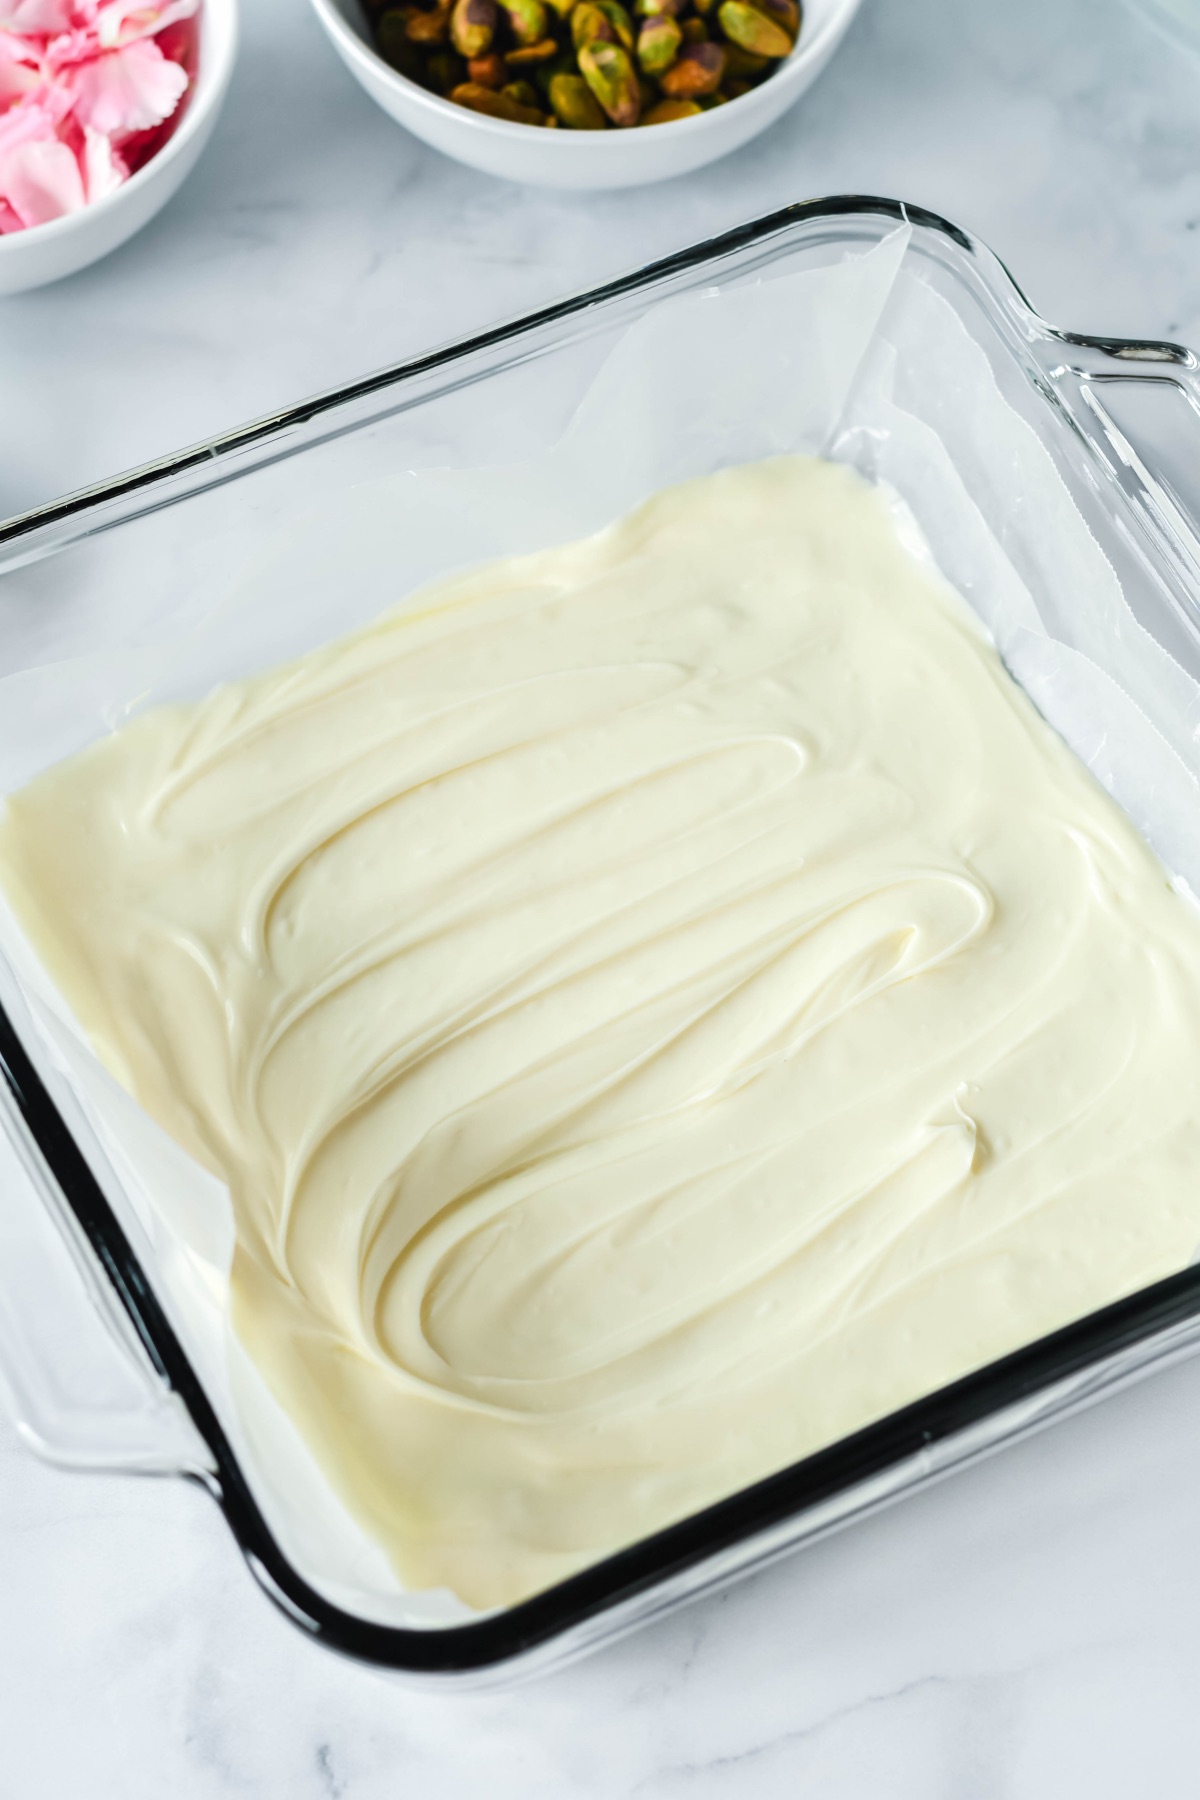 white chocolate in a pan to make bark